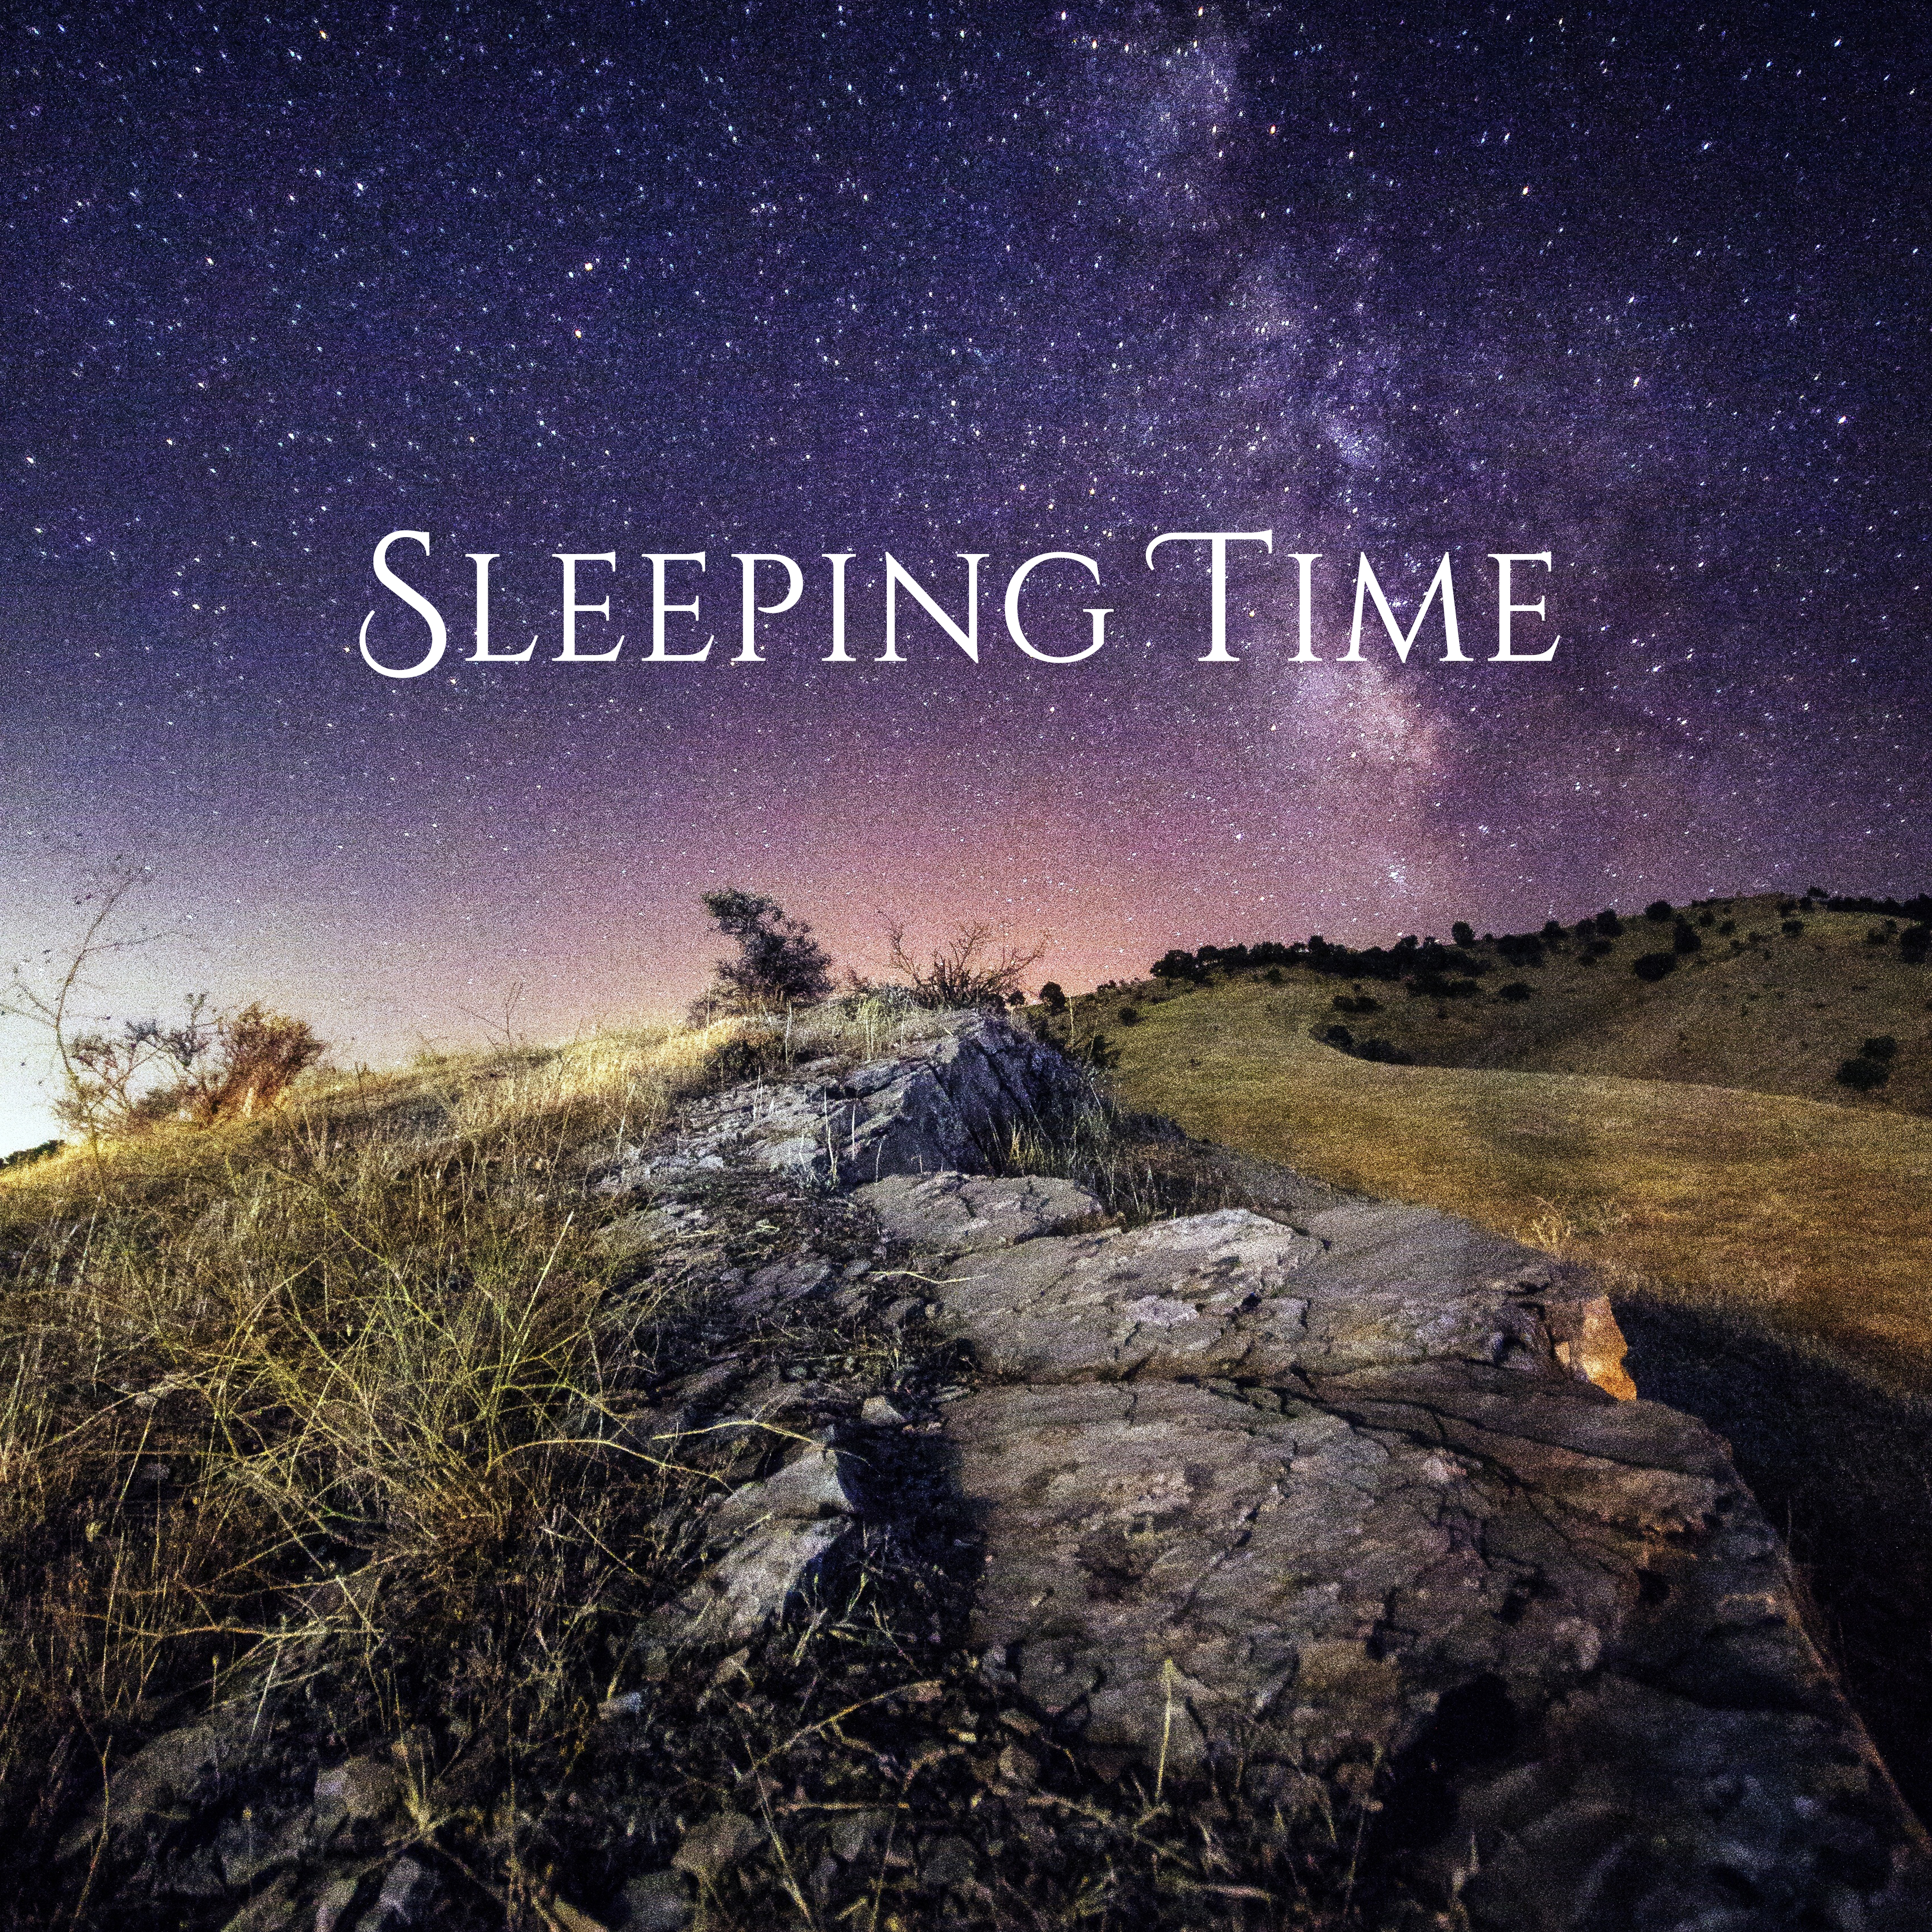 Sleeping Time  Soothing Music to Bed, Relaxation, Restful Sleep, Calming Melodies at Night, Pure Rest